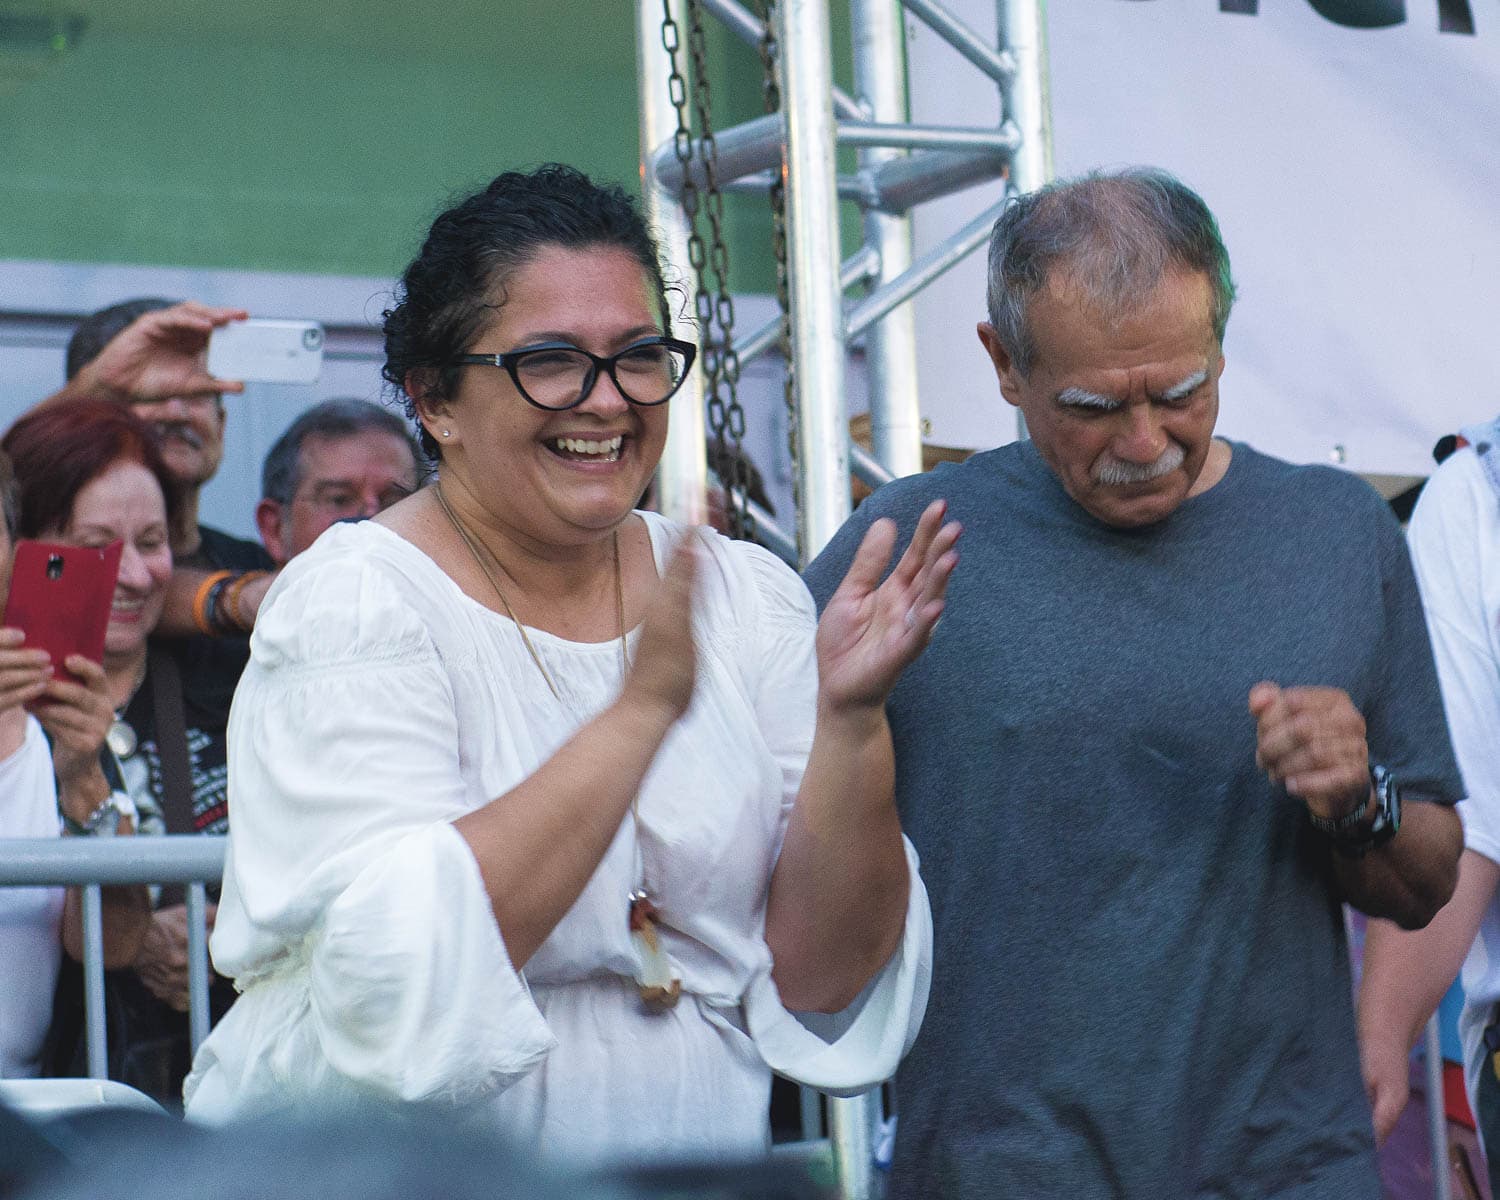 Oscar and his daughter dancing- Oscar Lopez Rivera’s Welcome Party